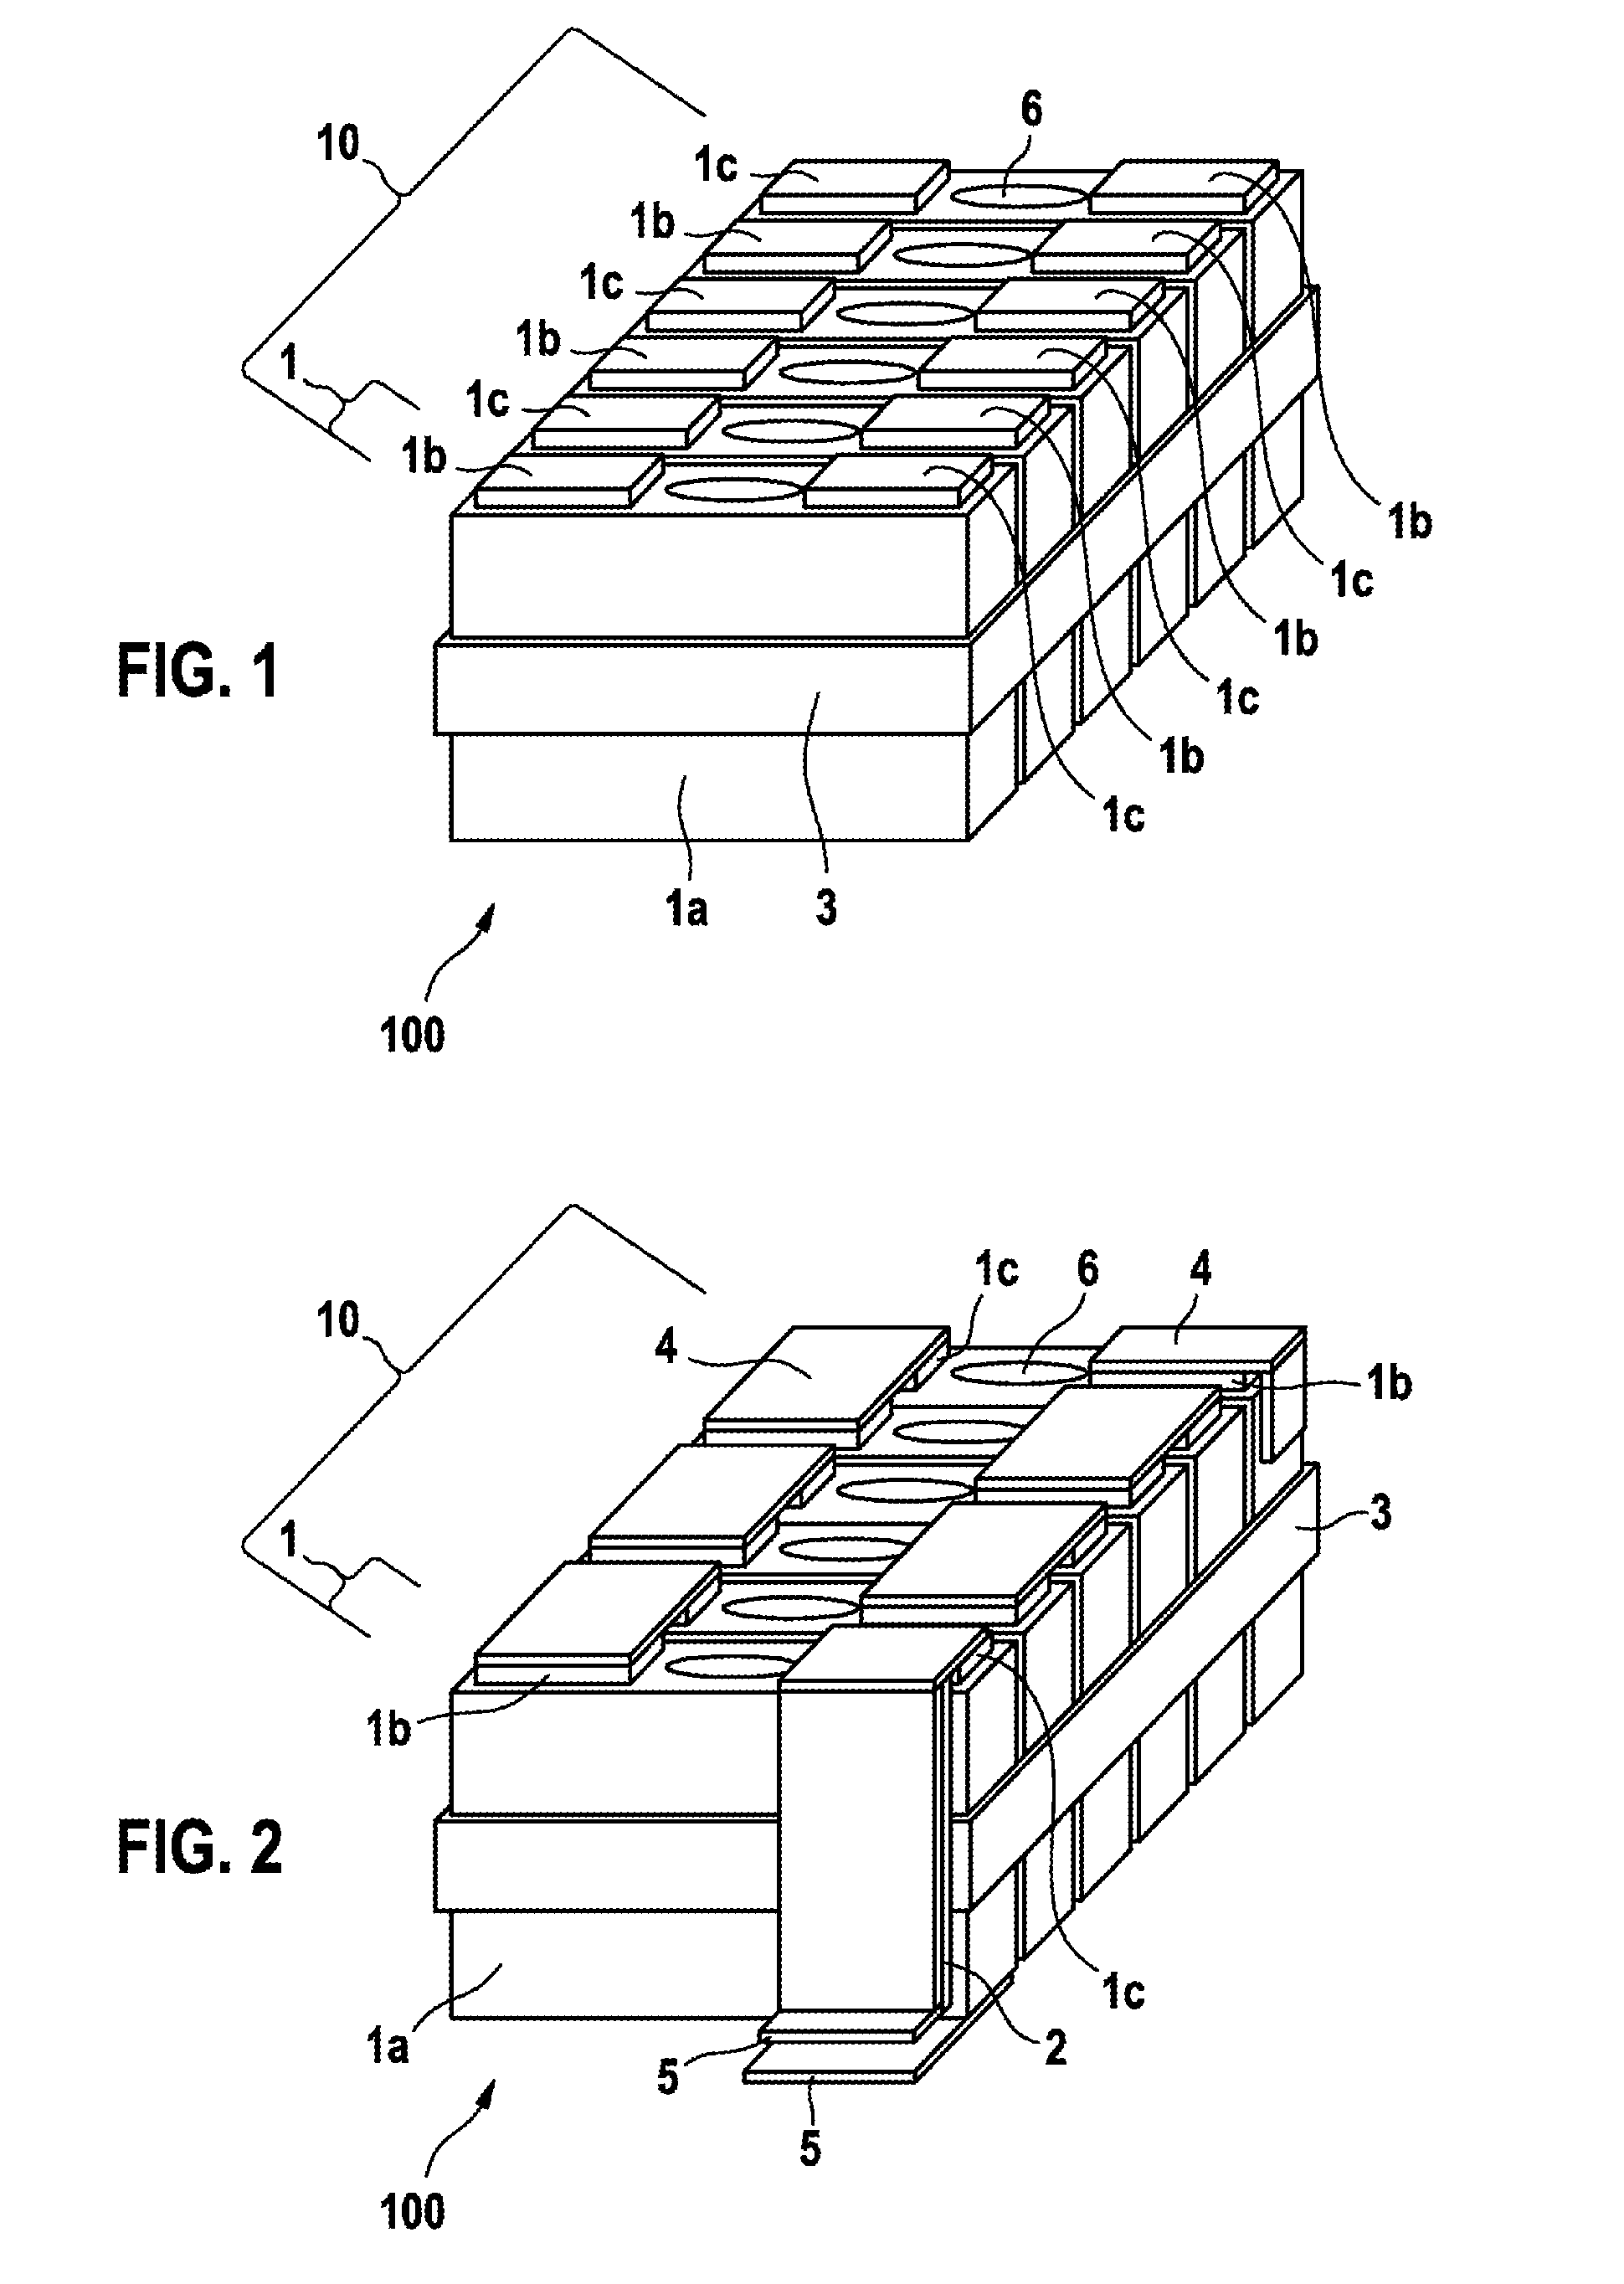 Electrical energy storage module and method for producing an electrical energy storage module